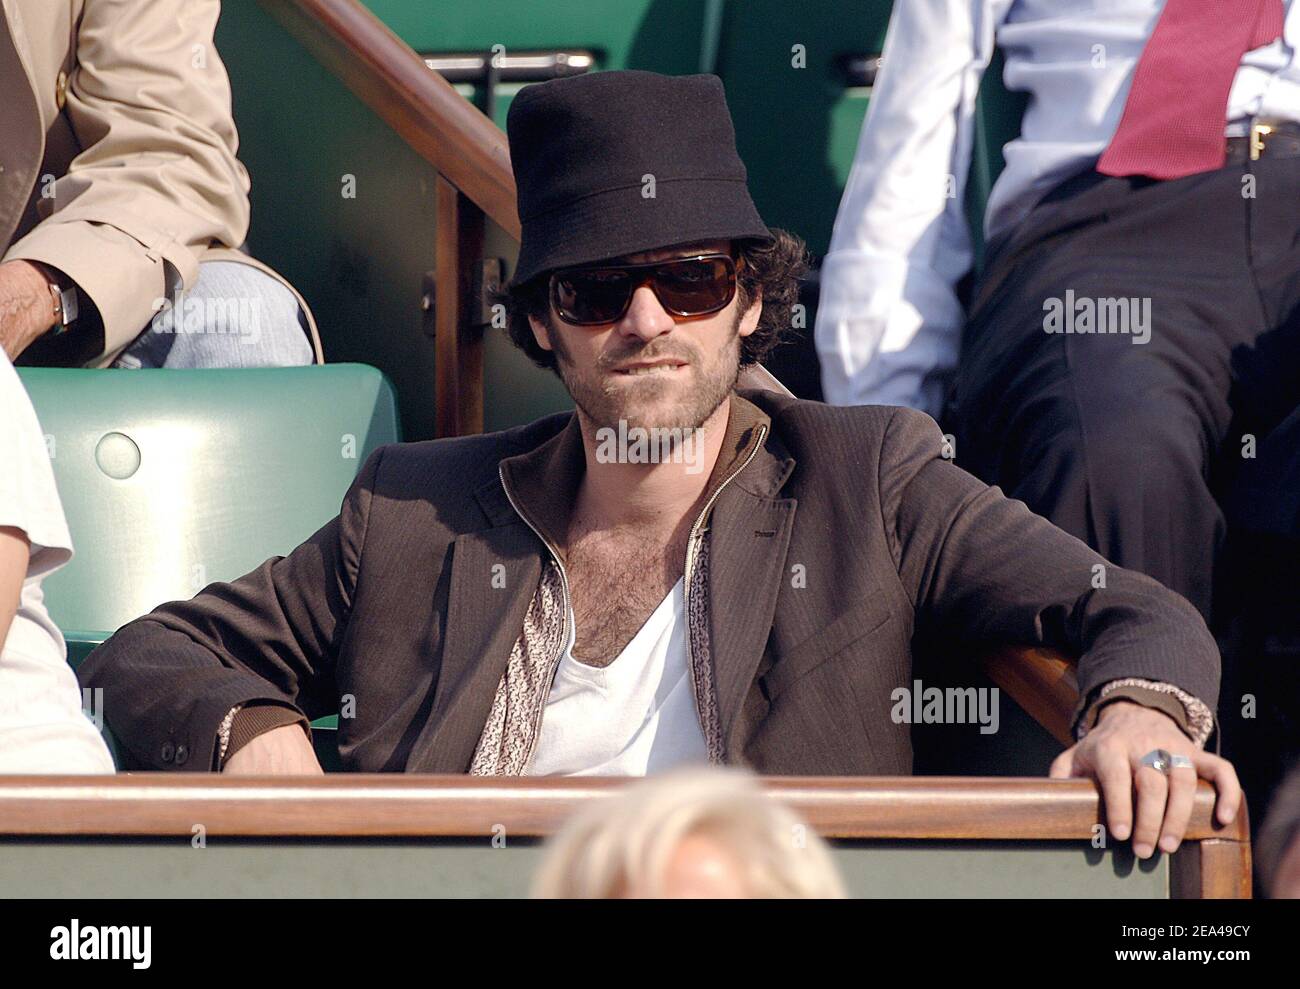 French actor Romain Duris with a friend attends the match between Spain's Rafael Nadal and Swiss Roger Federer in the semi final of the French Open at the Roland Garros stadium in Paris, France on June 03, 2005. Photo by Gorassini-Zabulon/ABACA. Stock Photo